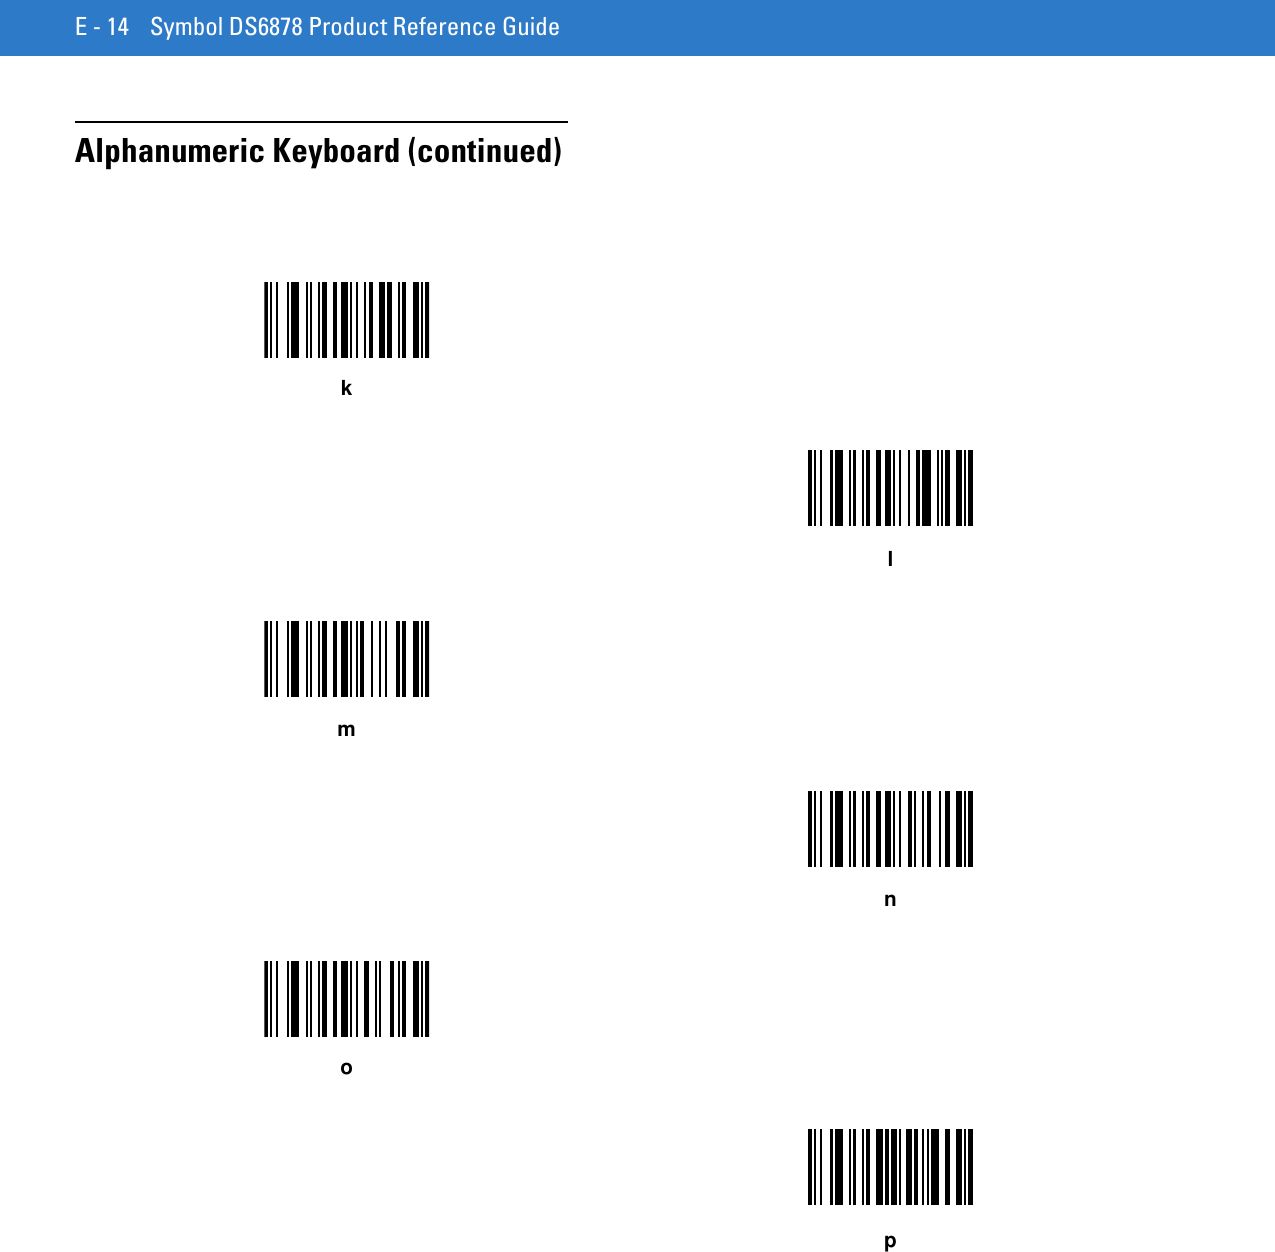 E - 14 Symbol DS6878 Product Reference GuideAlphanumeric Keyboard (continued)klmnop